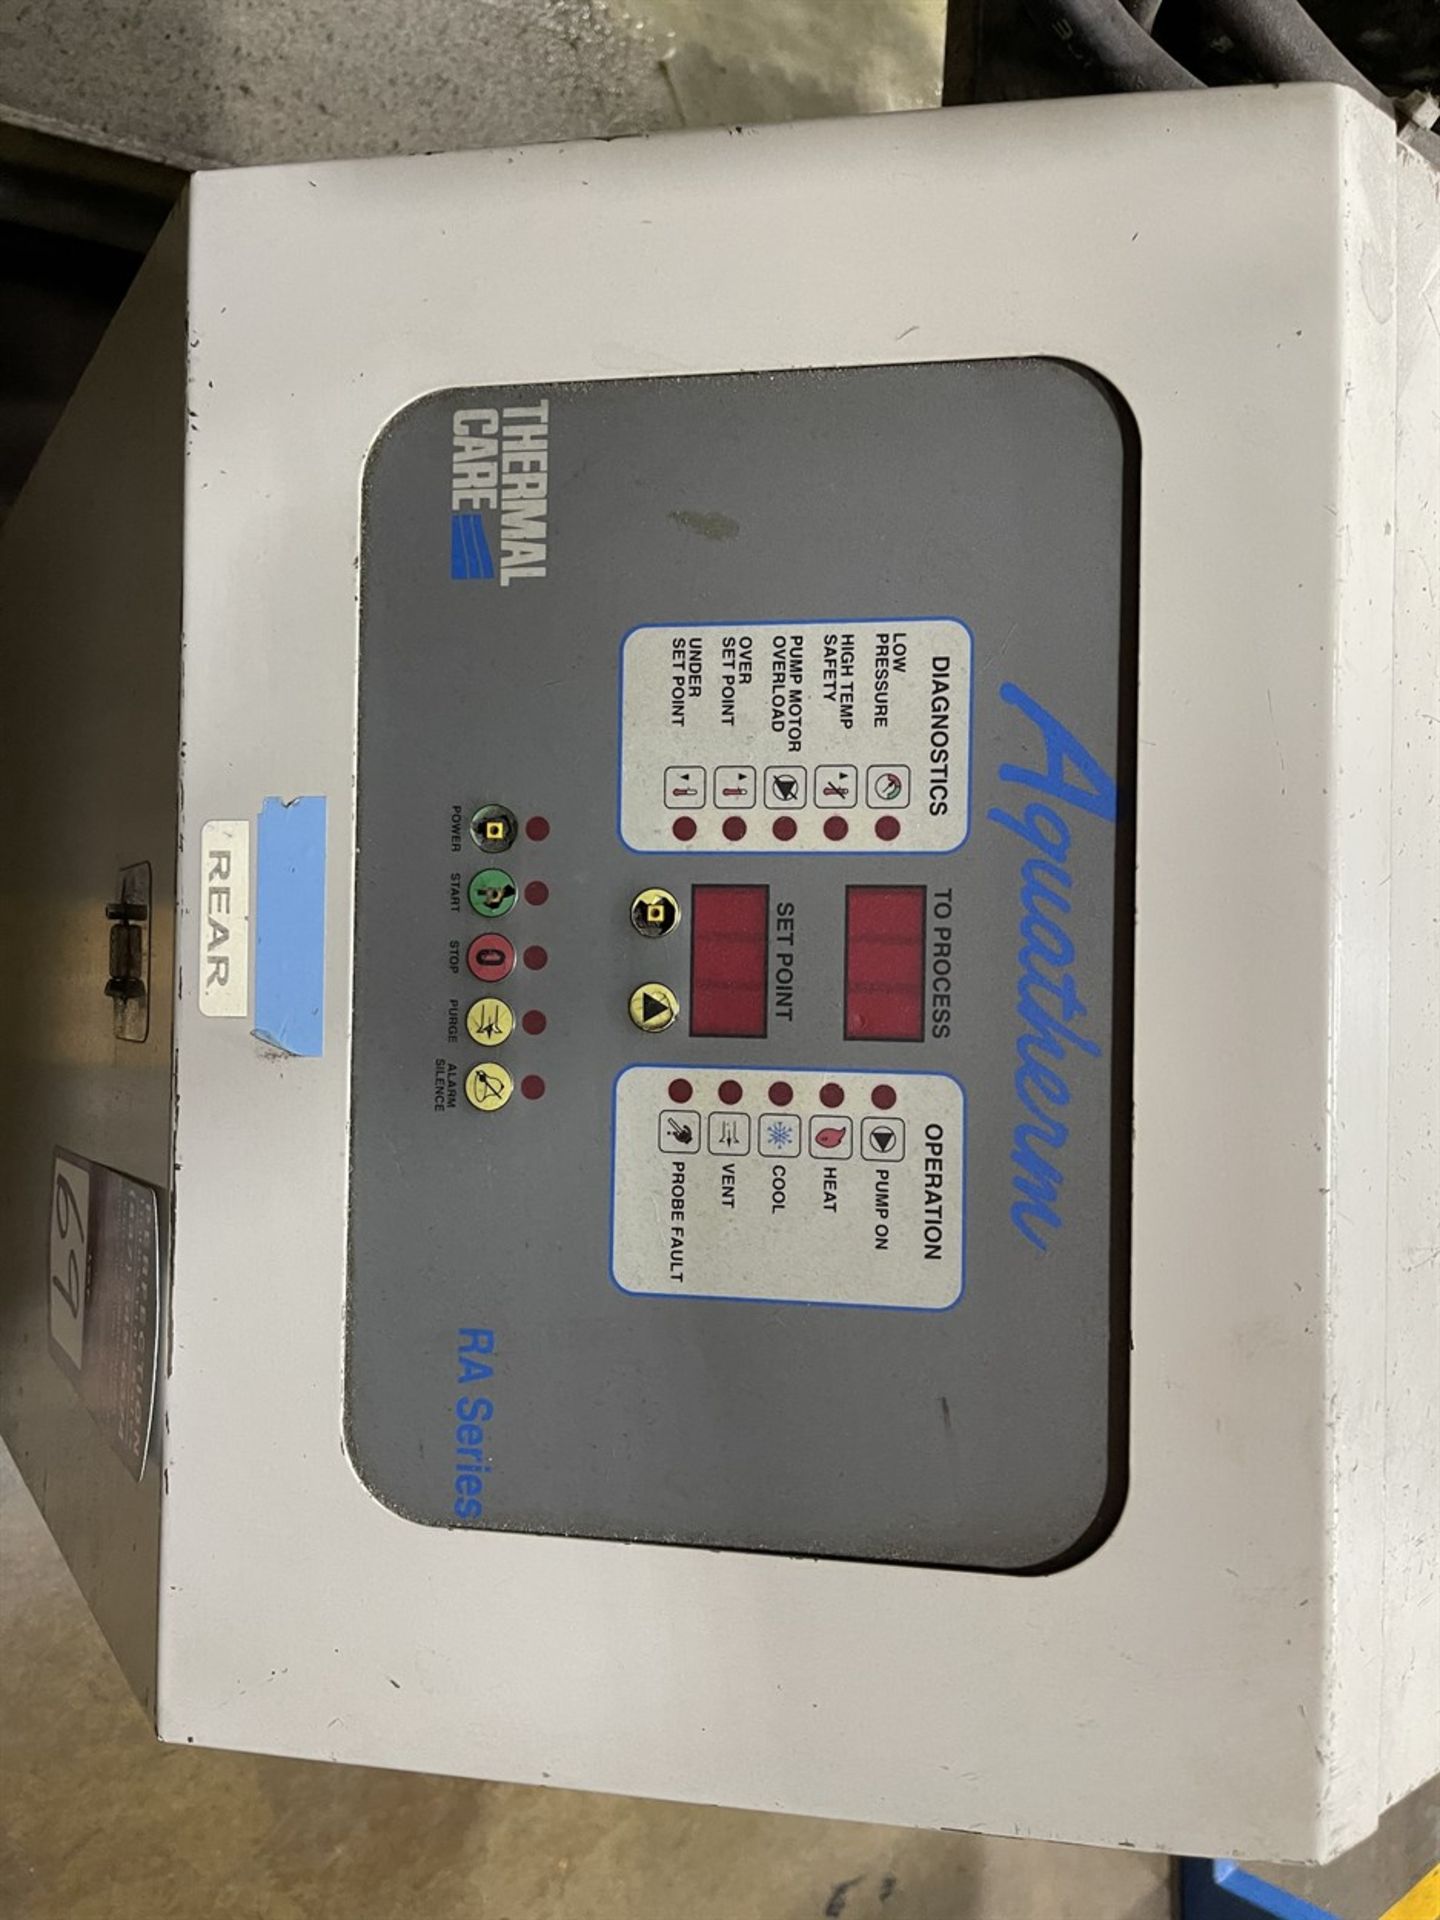 THERMAL CARE Aquatherm RA091004 Temperature Controller, s/n 12050039809 - Image 2 of 3